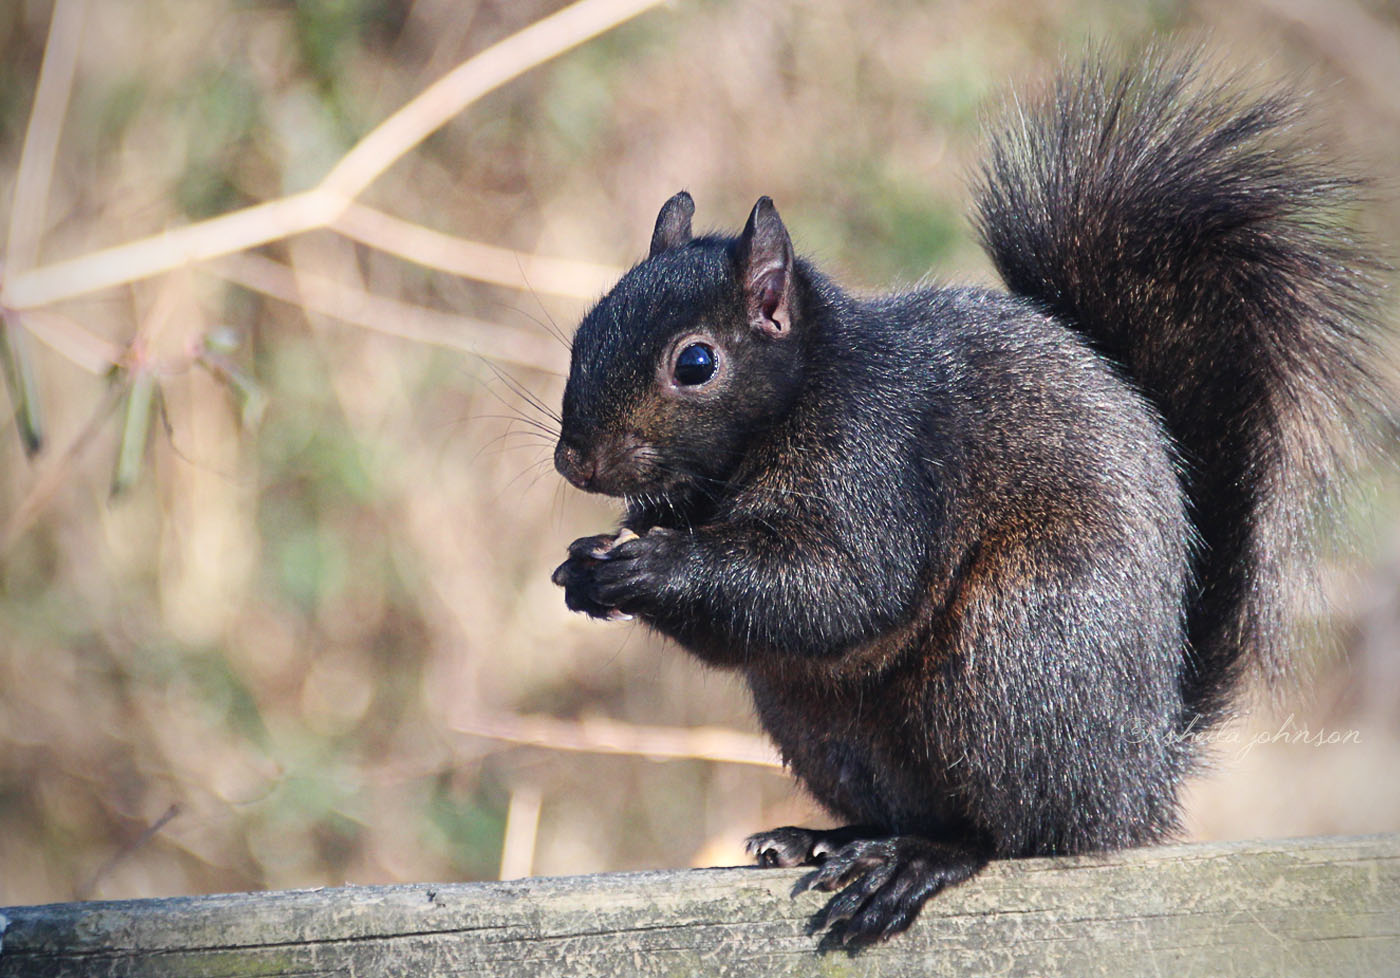 I Love All The Squirrels, But, Gosh, These Black Squirrels Are Surely The Prettiest.